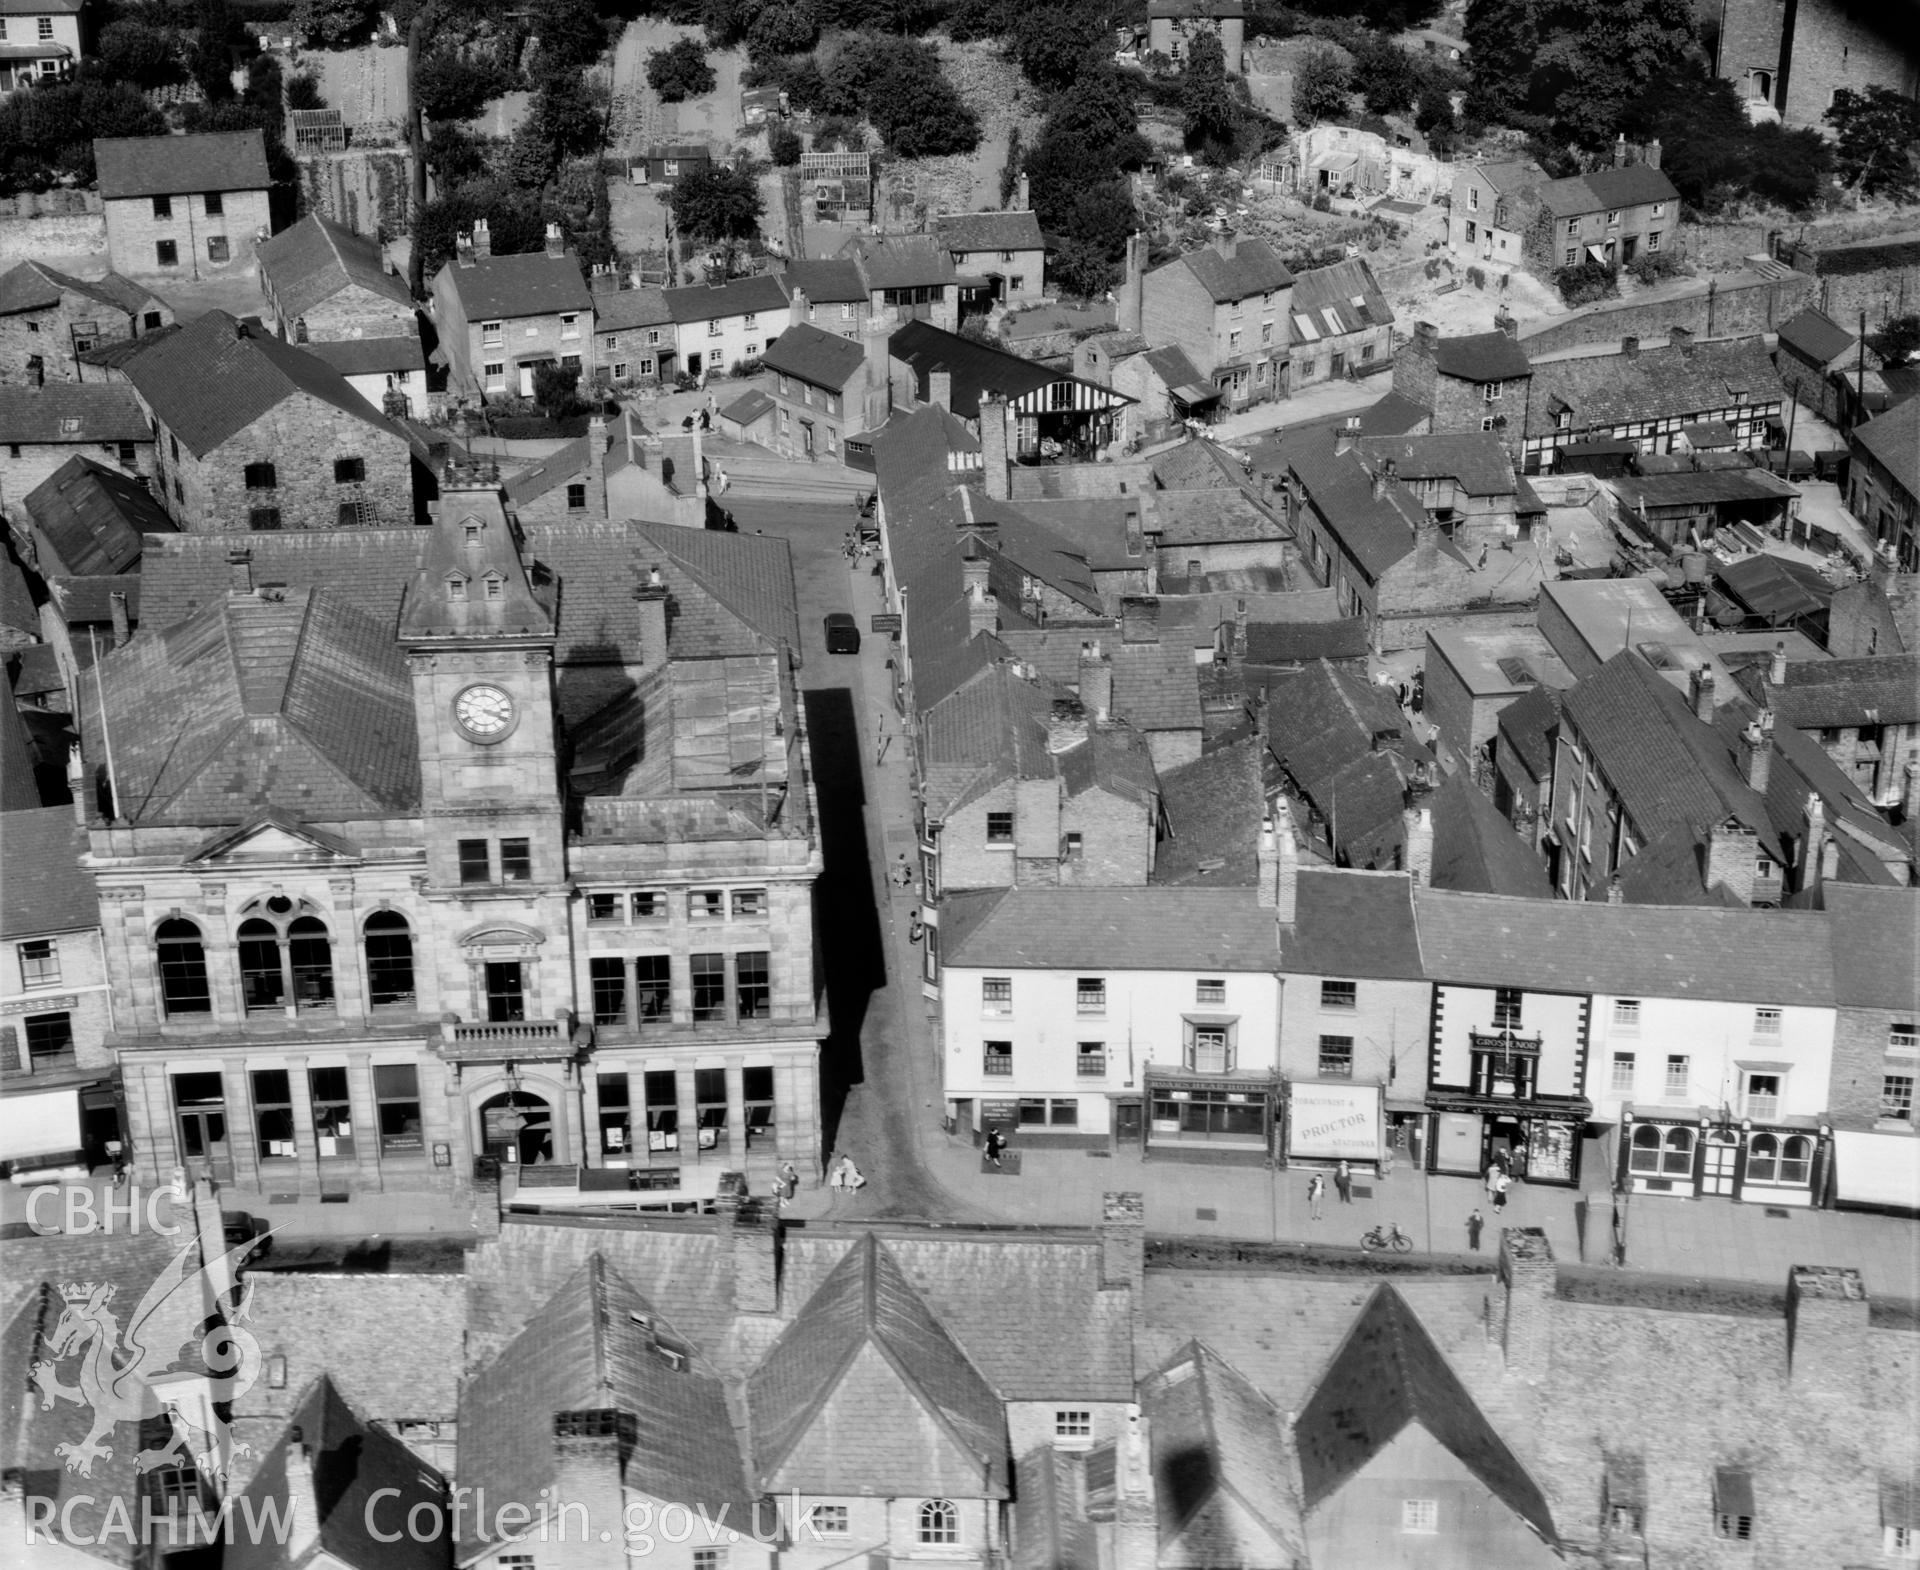 Close view of Welshpool showing the Town Hall and streets